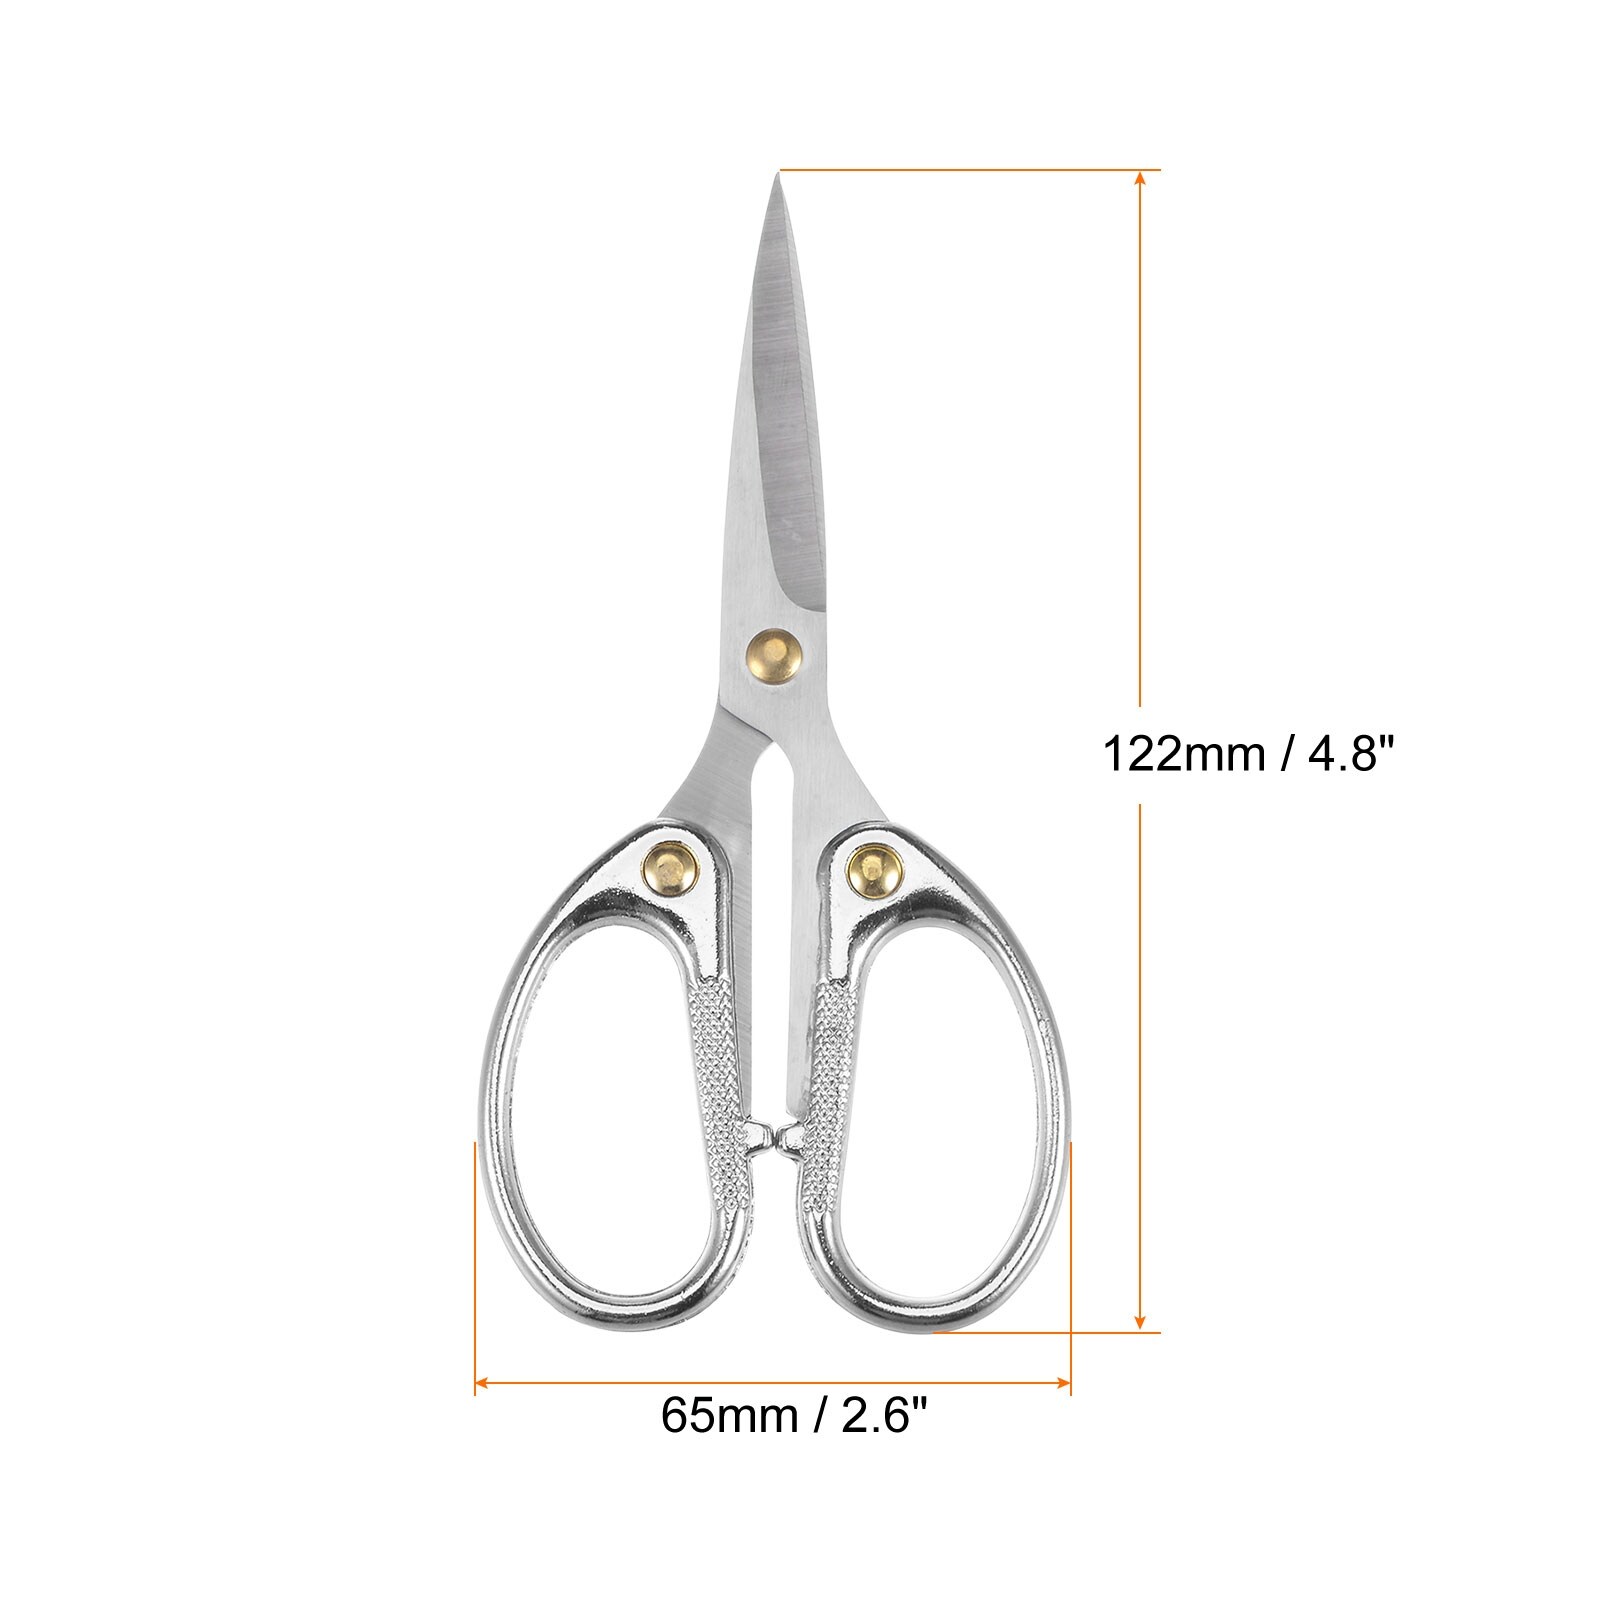 Embroidery Scissors, Stainless Steel Craft Scissors Decorative Engraving  Pattern Design Crafting Scissors for Embroidery Craft Needle Work(Silver)